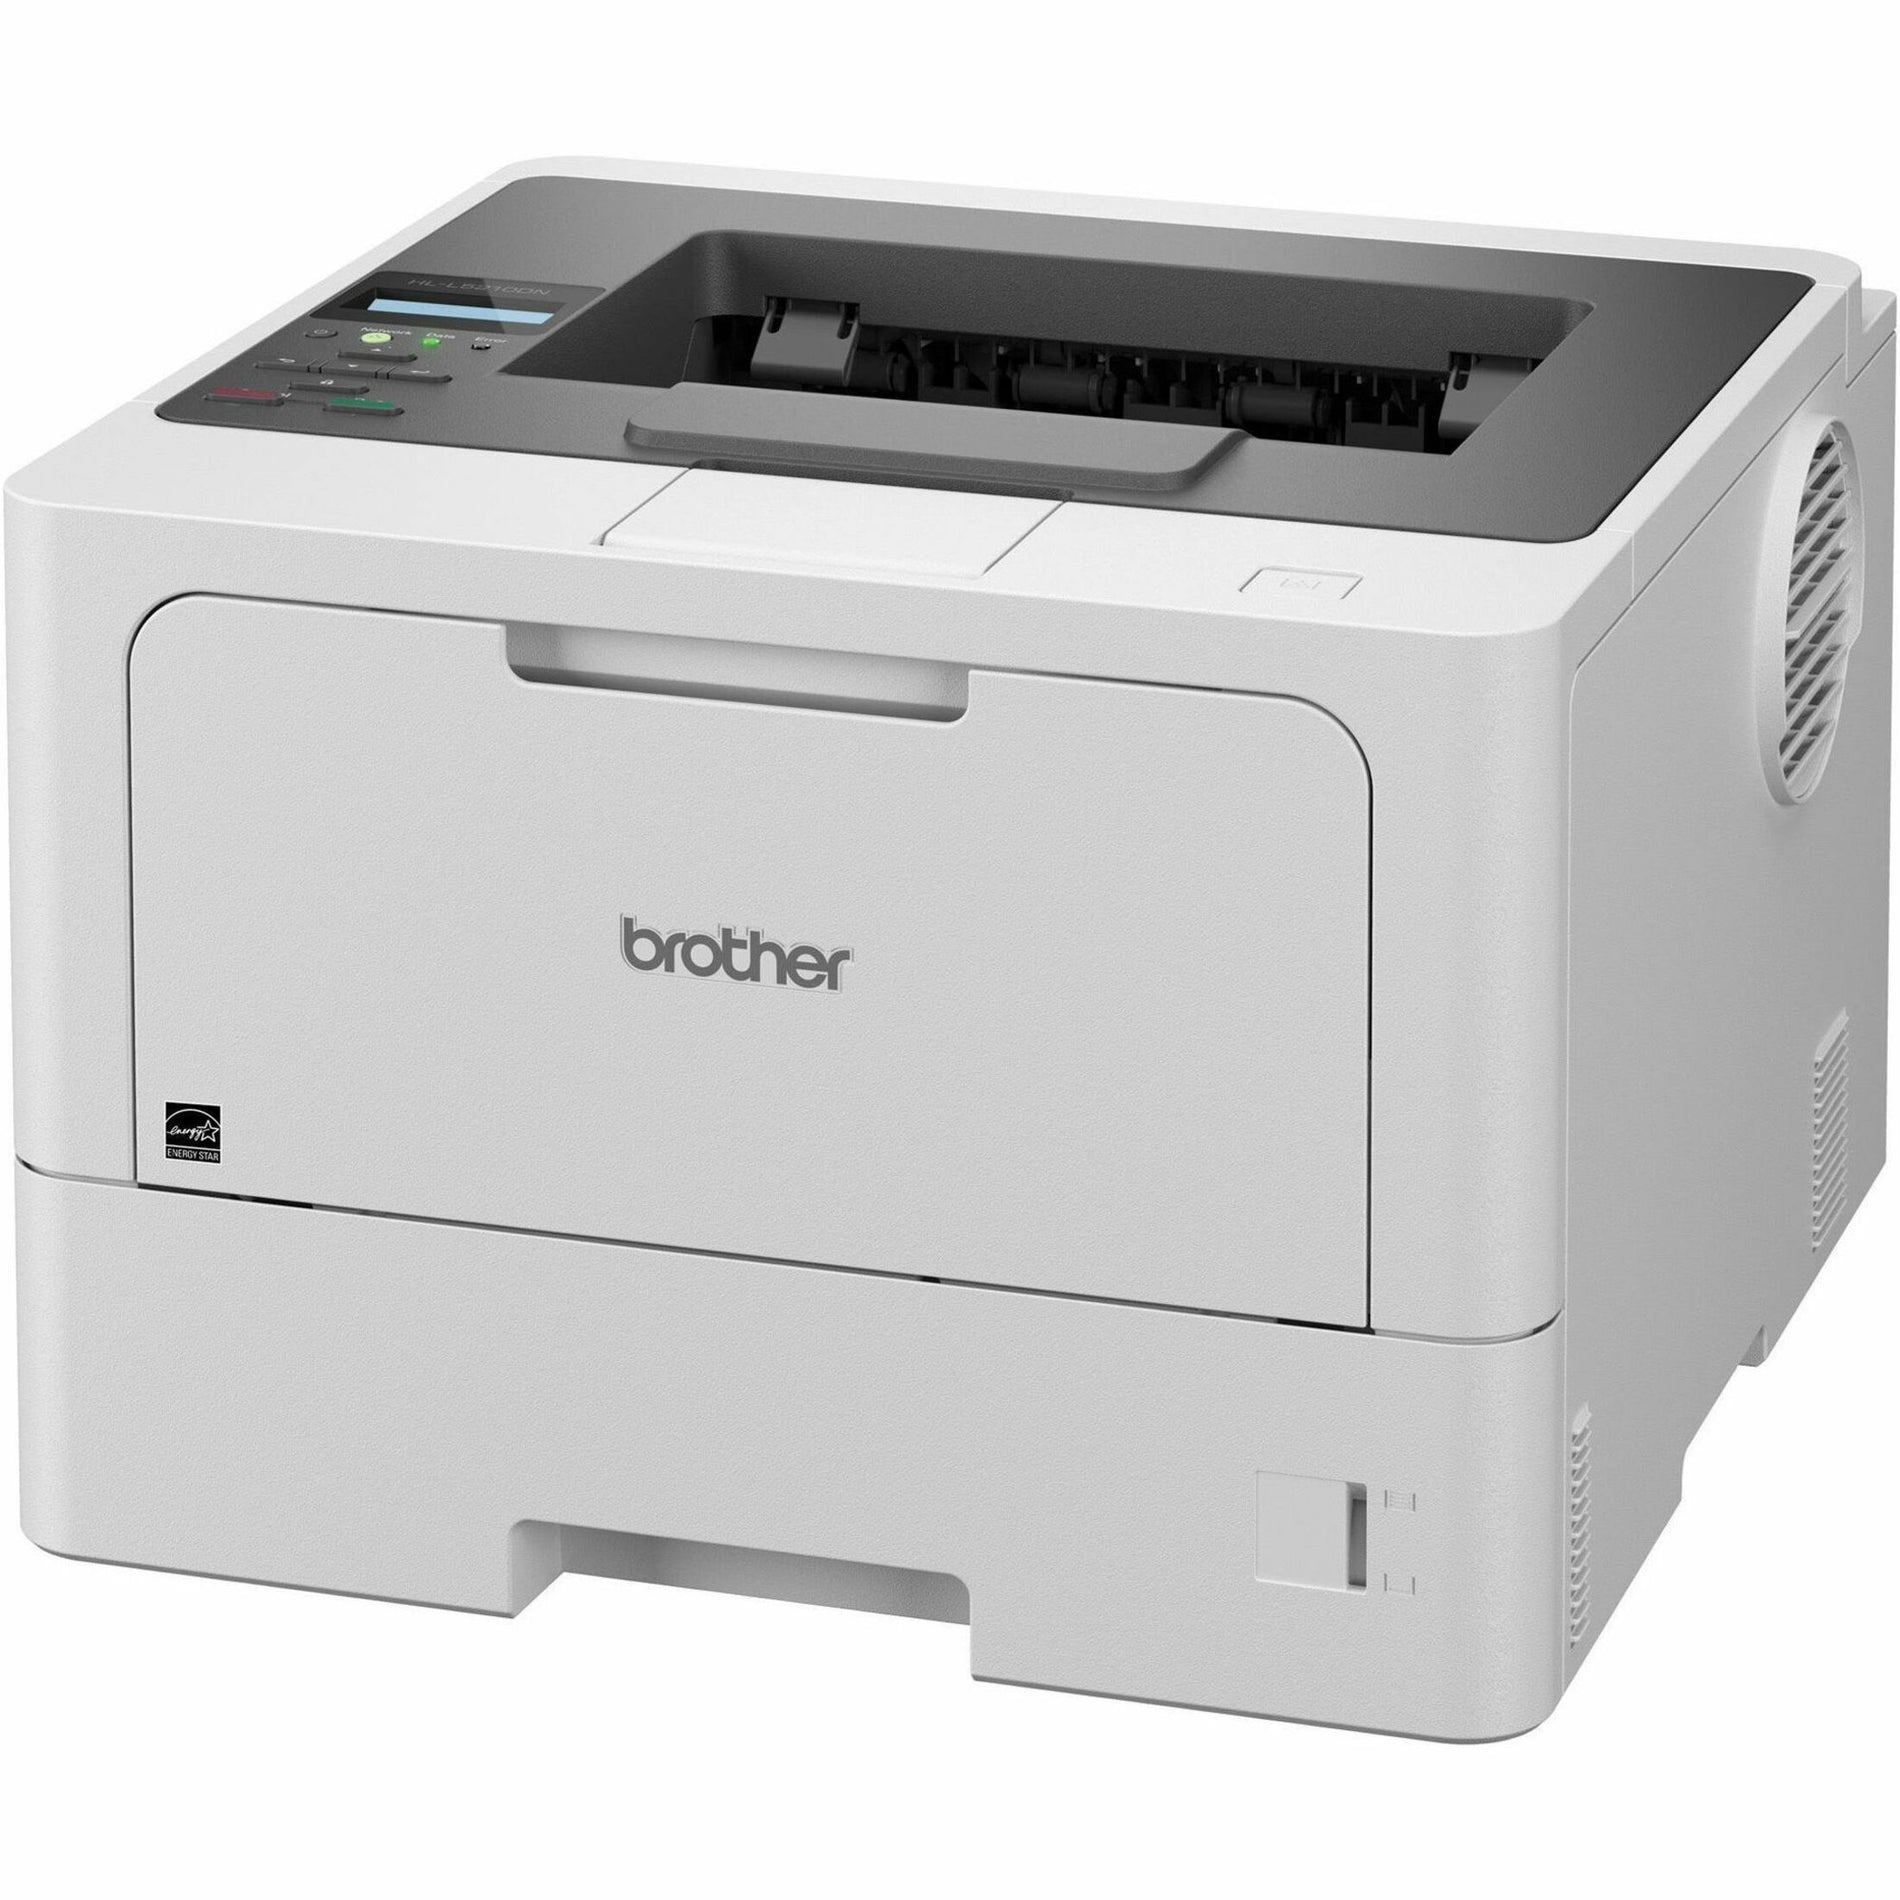 Brother HLL5210DN Mono Laser Printer, Wired, Automatic Duplex Printing, 50 ppm, 1200 x 1200 dpi, 350 Sheets, Gigabit Ethernet